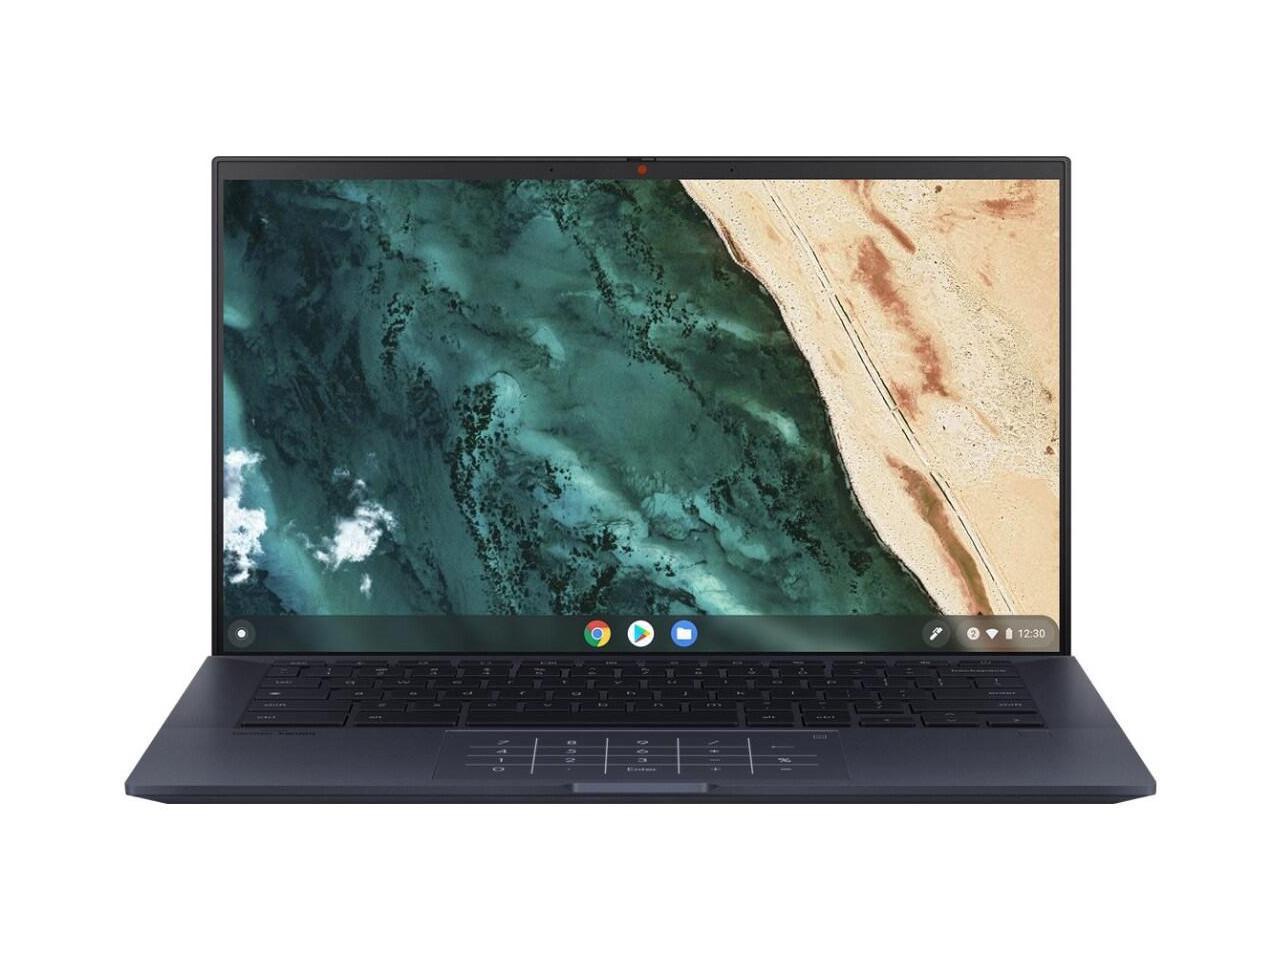 Refurbished: ASUS Chromebook CX9 14" FHD LED Touchscreen Intel Core i5-1135G7 2.4 GHz up to 4.2 GHz 4 cores Intel Iris Xe Graphics 16GB DDR4 RAM 512GB NVMe PCIe 3.0 SSD Chrome OS - Newegg.com